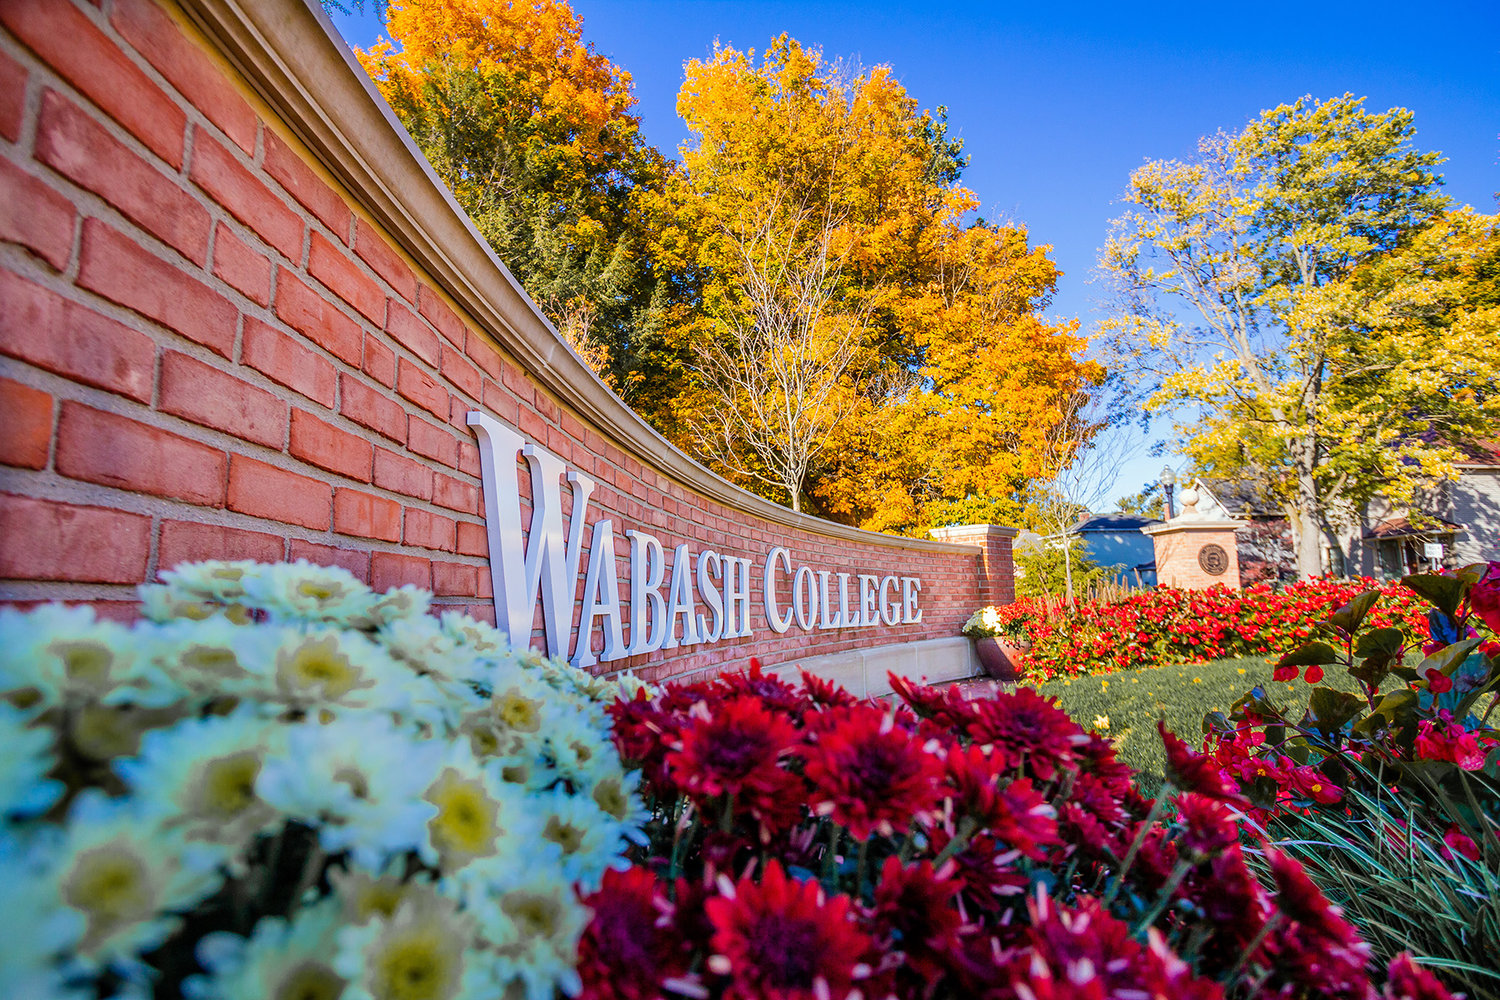 For 31 consecutive years, Wabash College has ranked prominently in The Princeton Review’s listing of the best institutions nationally for undergraduate education in its annual college guide.